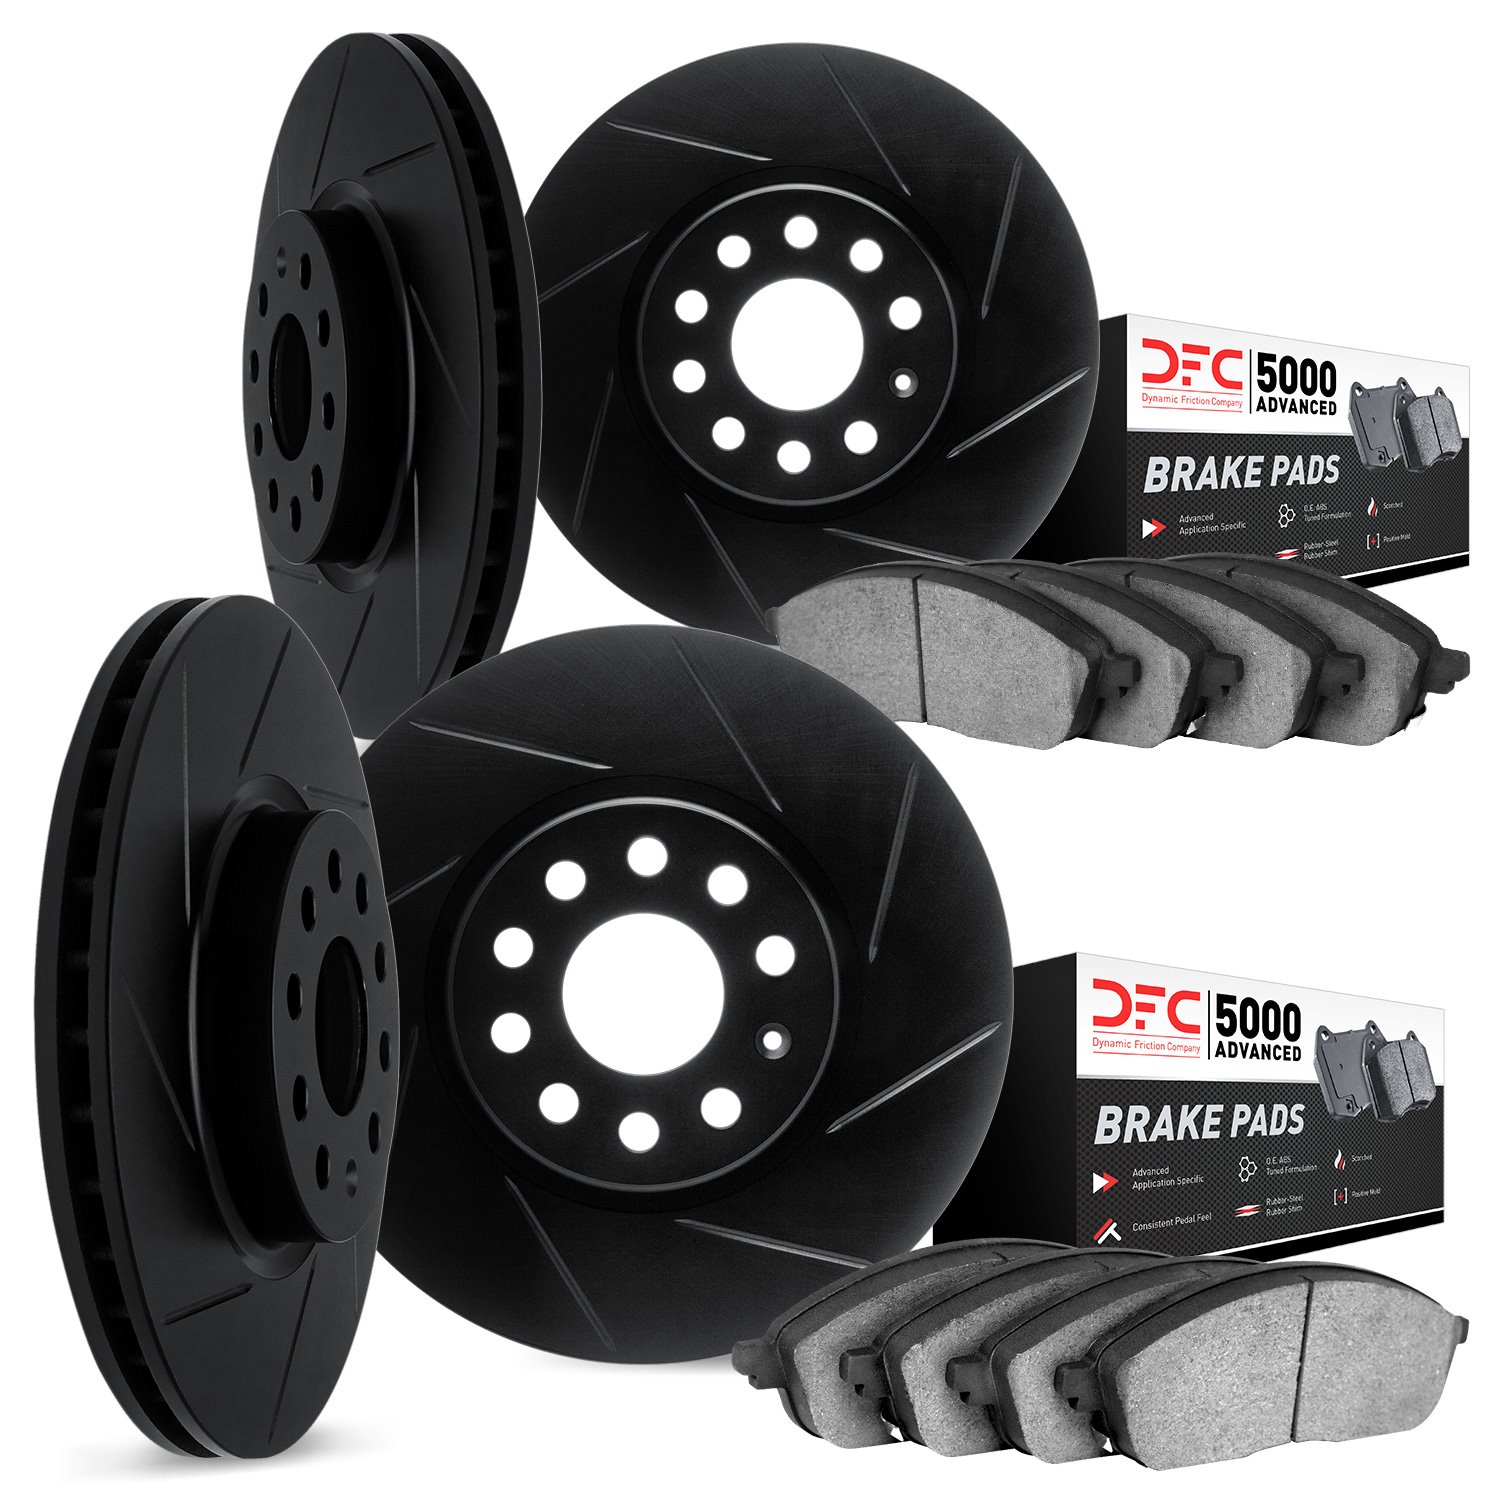 3514-31070 Slotted Brake Rotors w/5000 Advanced Brake Pads Kit & Hardware [Black], 2014-2019 BMW, Position: Front and Rear